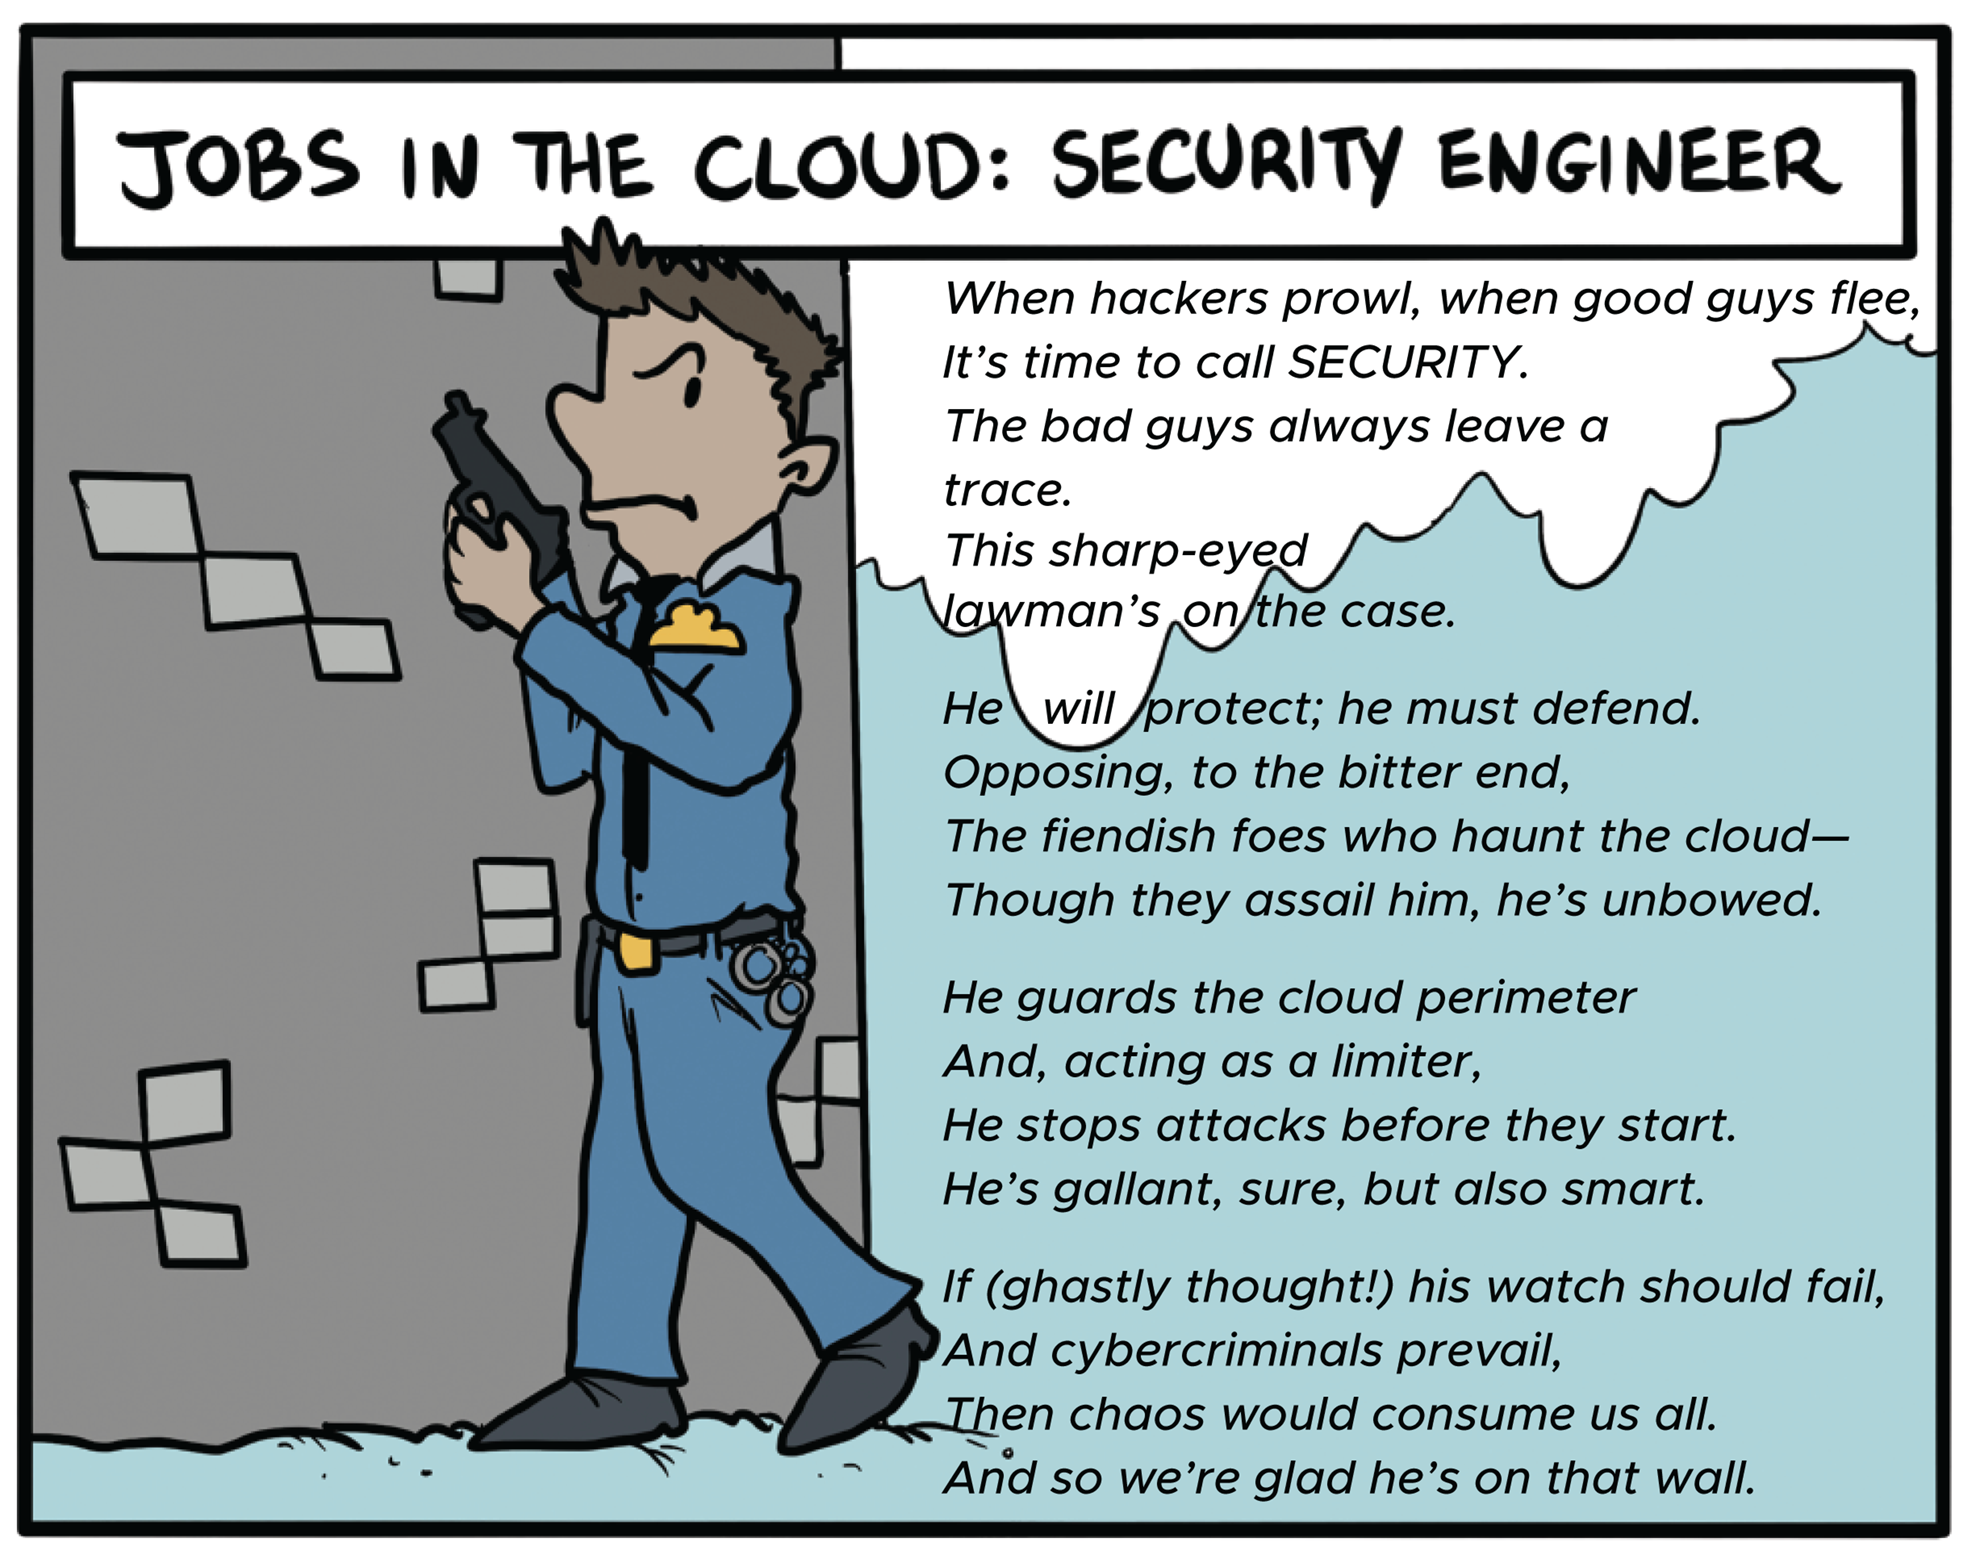 Cartoon illustration of a security engineer guarding the data.